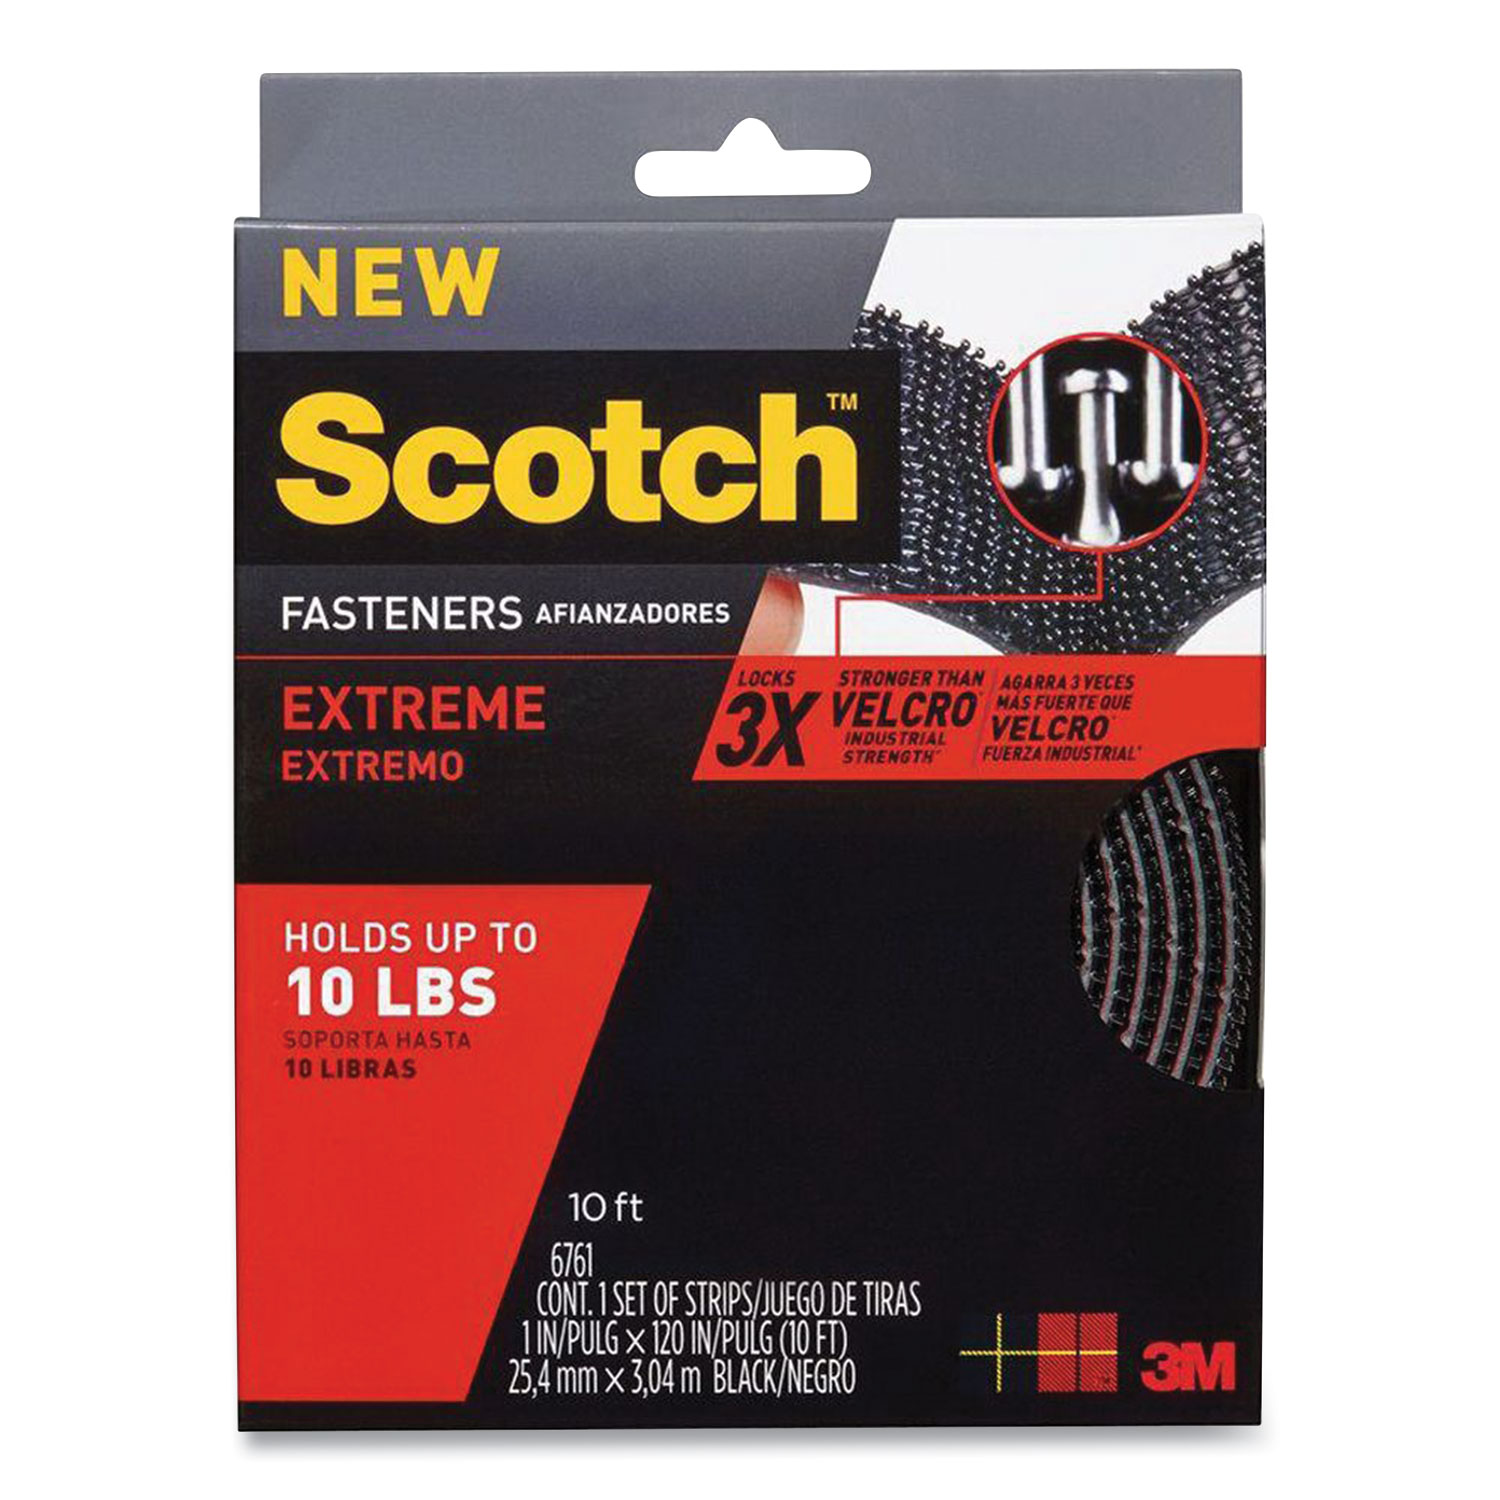 3M Scotch Extreme Dual Lock Fasteners Review